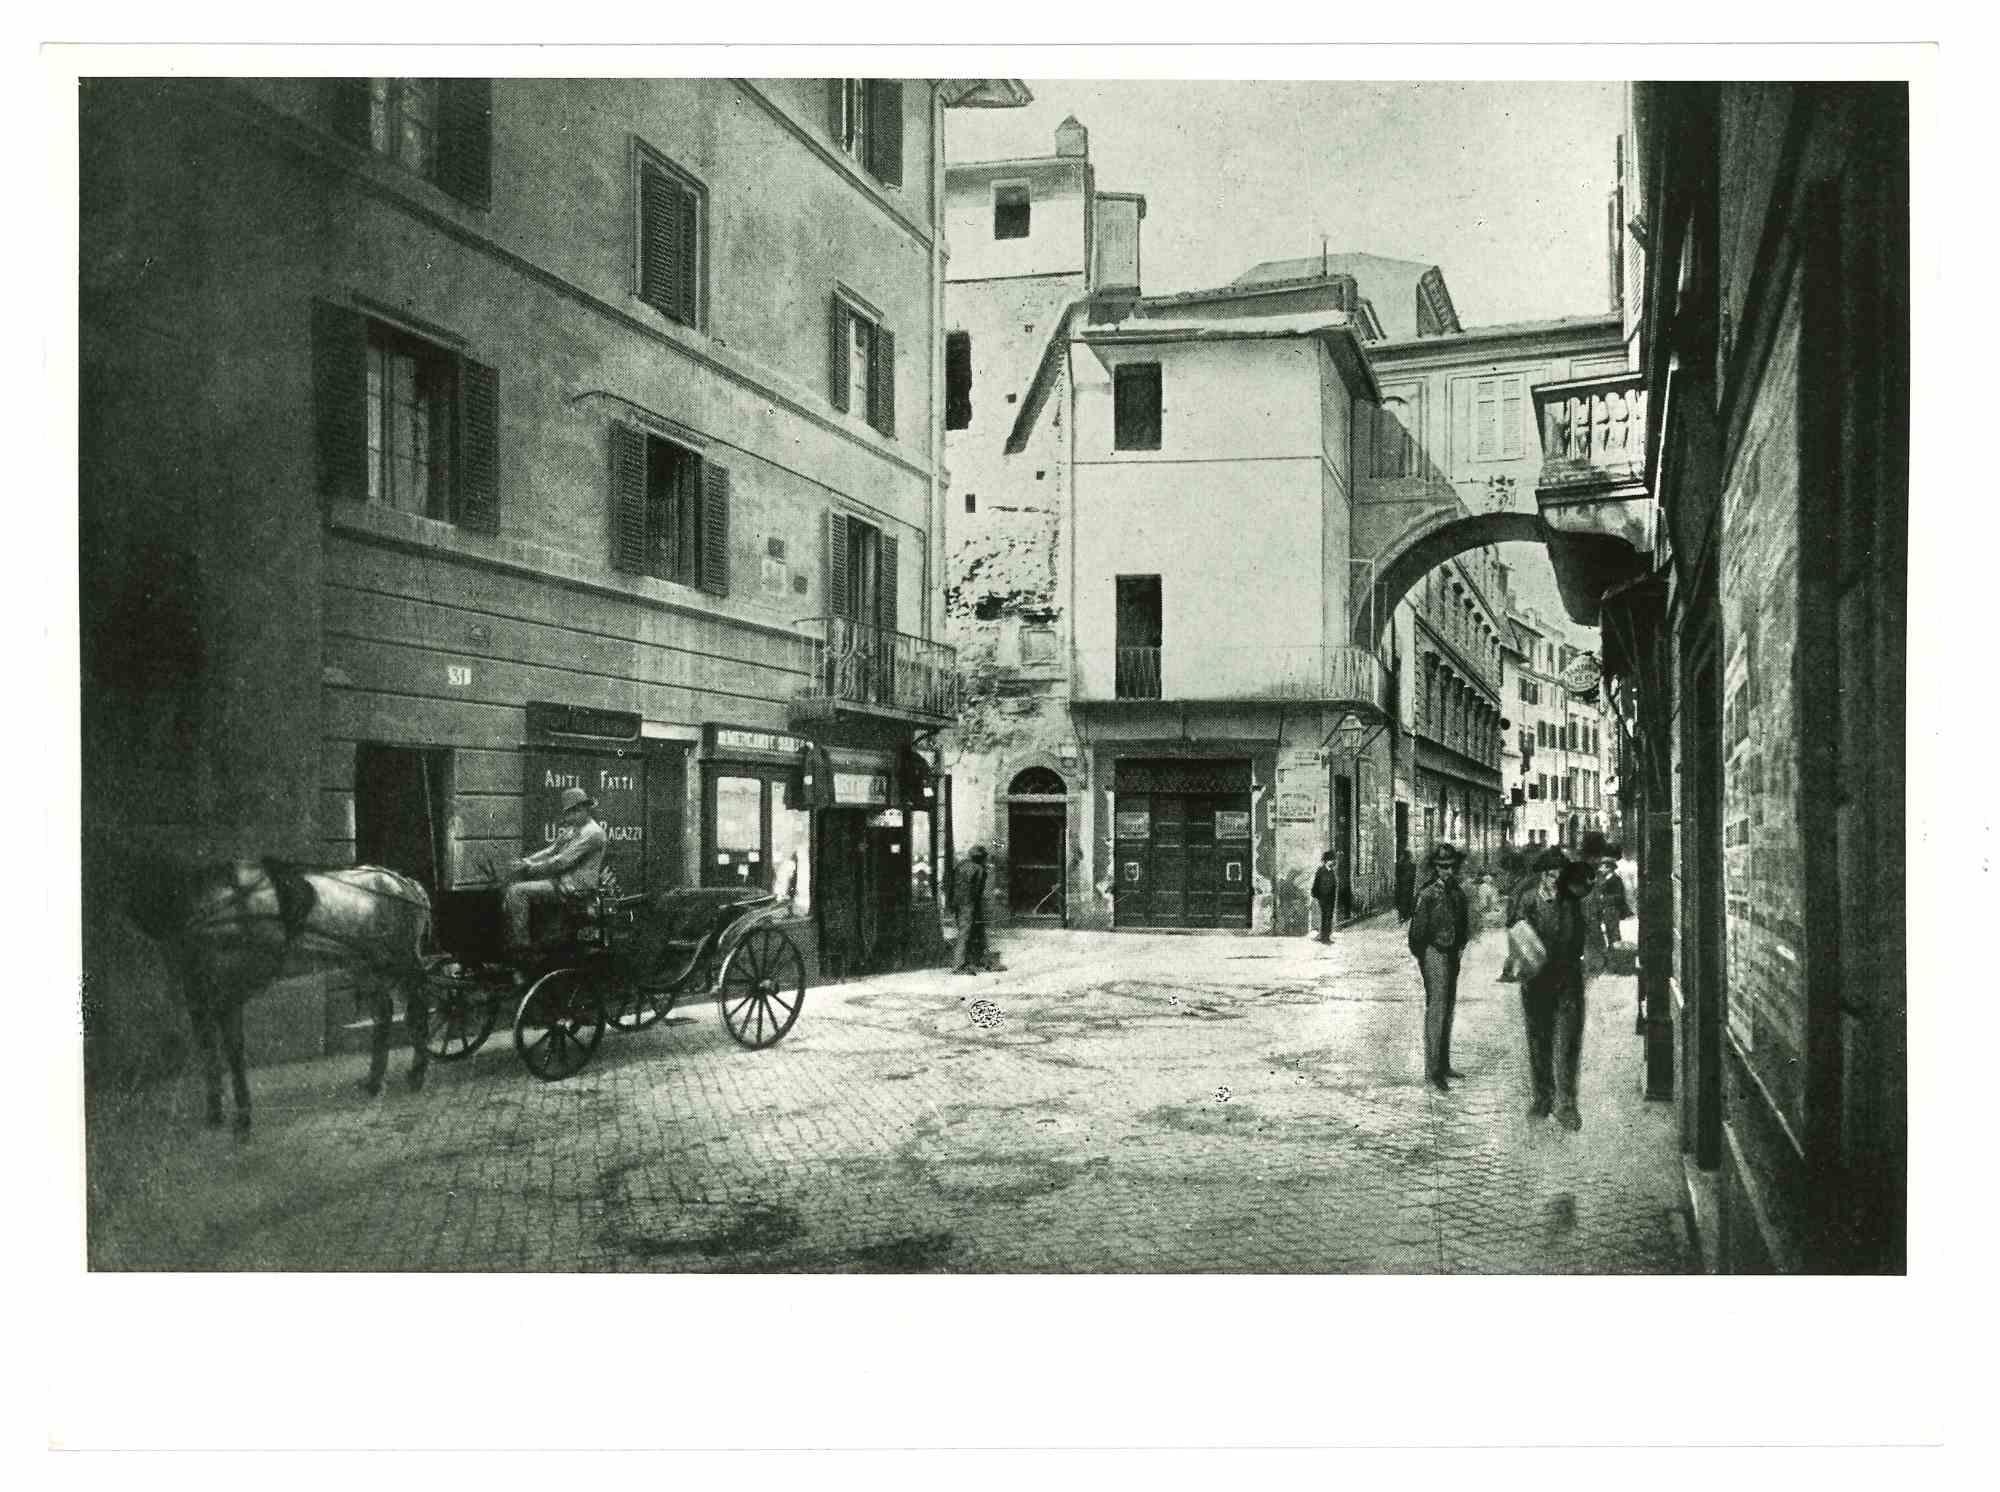 View Of Rome - Vintage Photograph - Early 20th Century